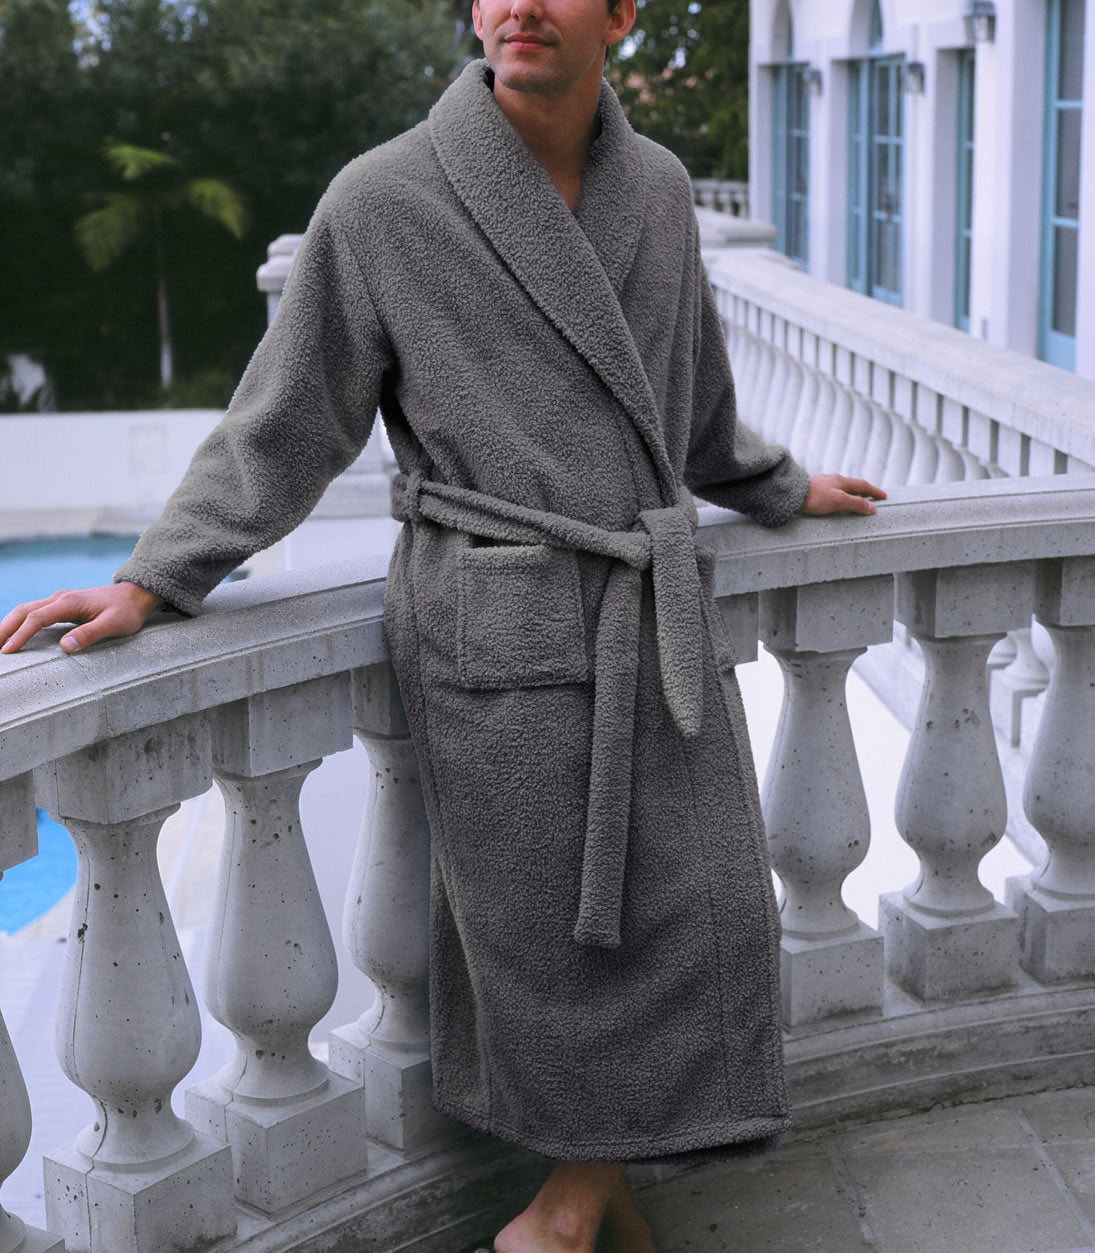 Tall Men's Robe: Charcoal Robes for Tall Guys